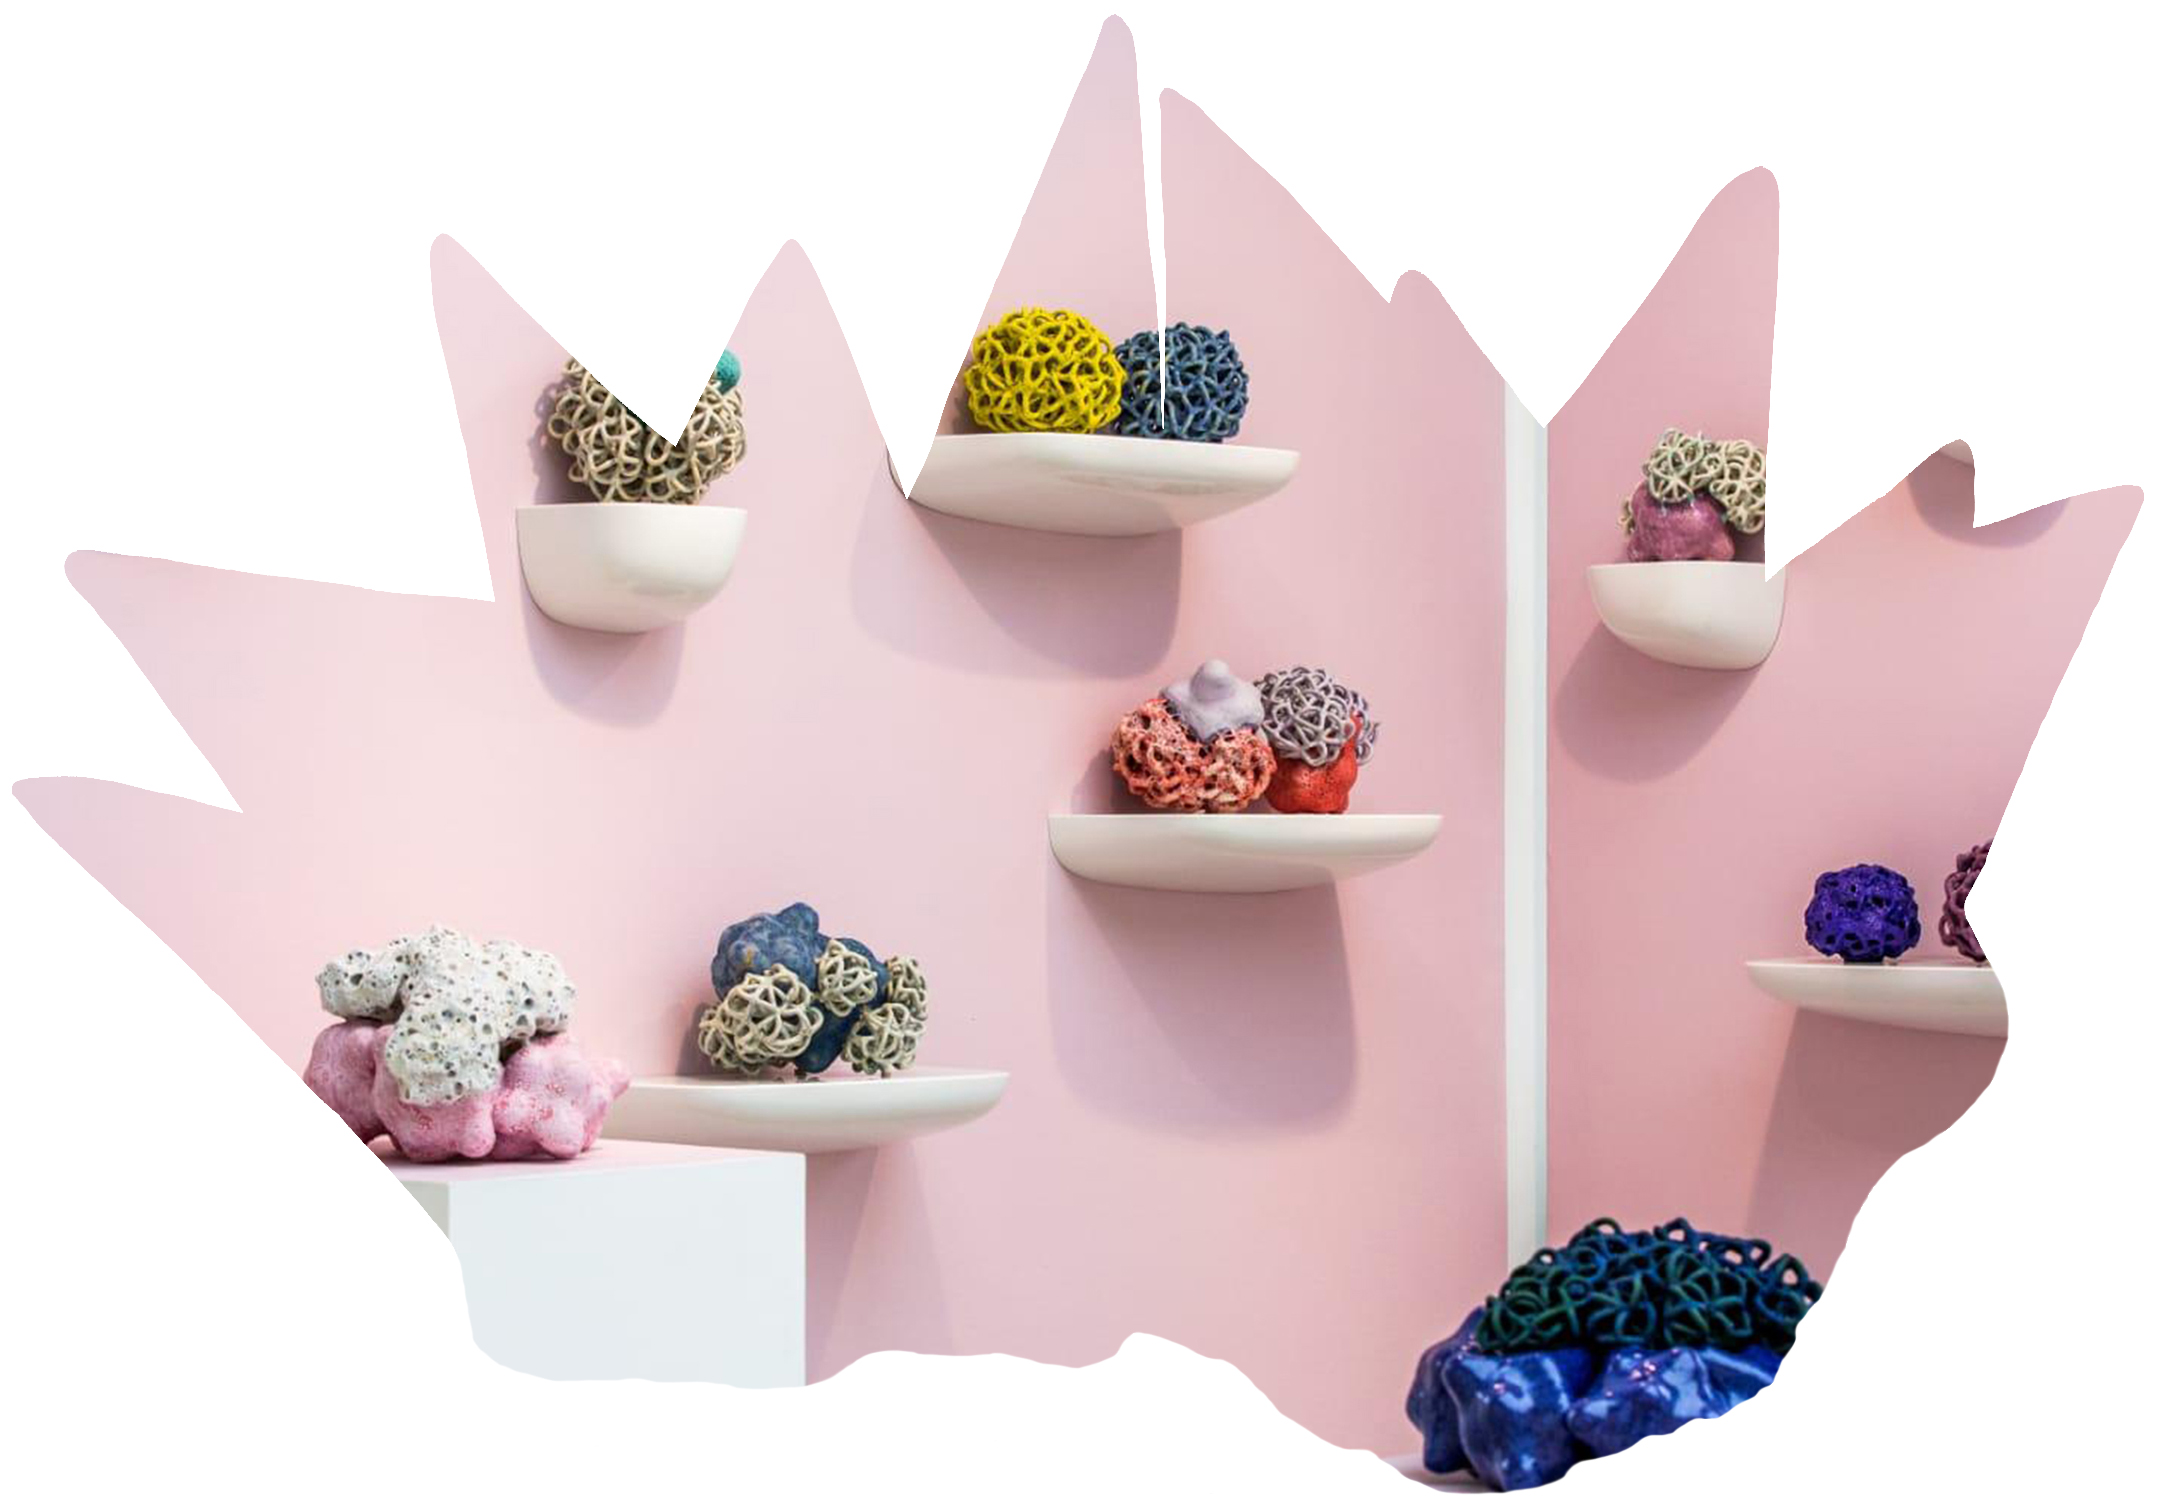 Tessa Eastman's colourful ceramic sculptures on display in a gallery